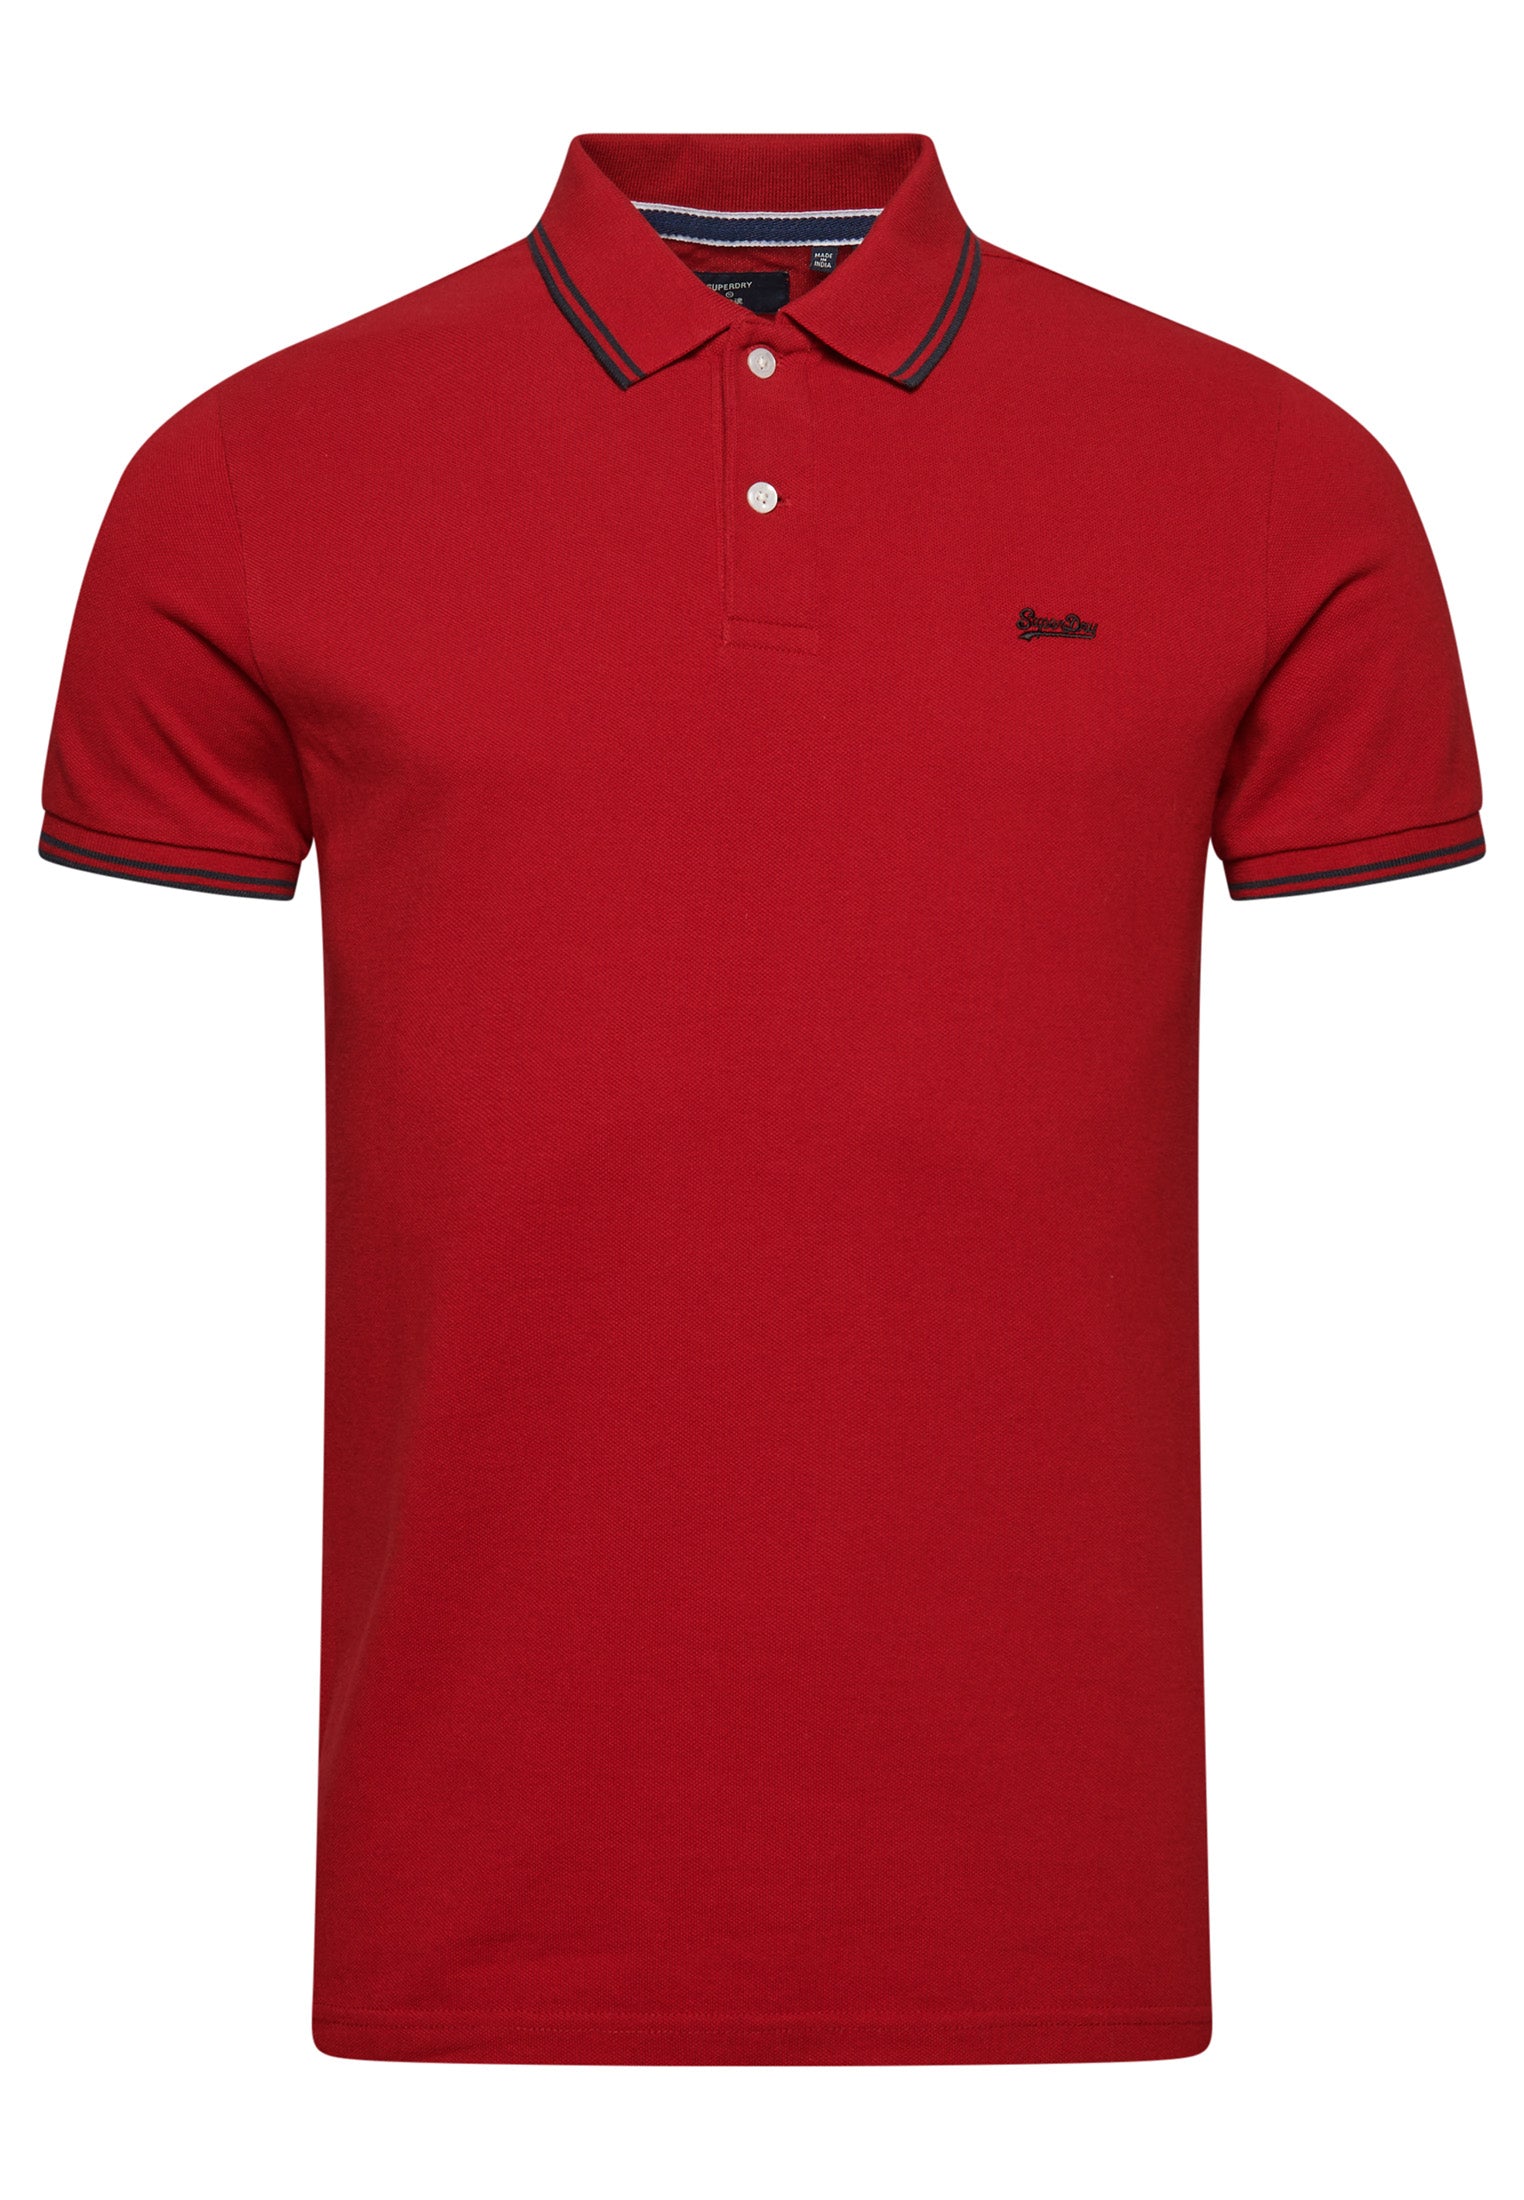 Men's Vintage Tipped Short Sleeve Polo Red/Navy-Ghost View